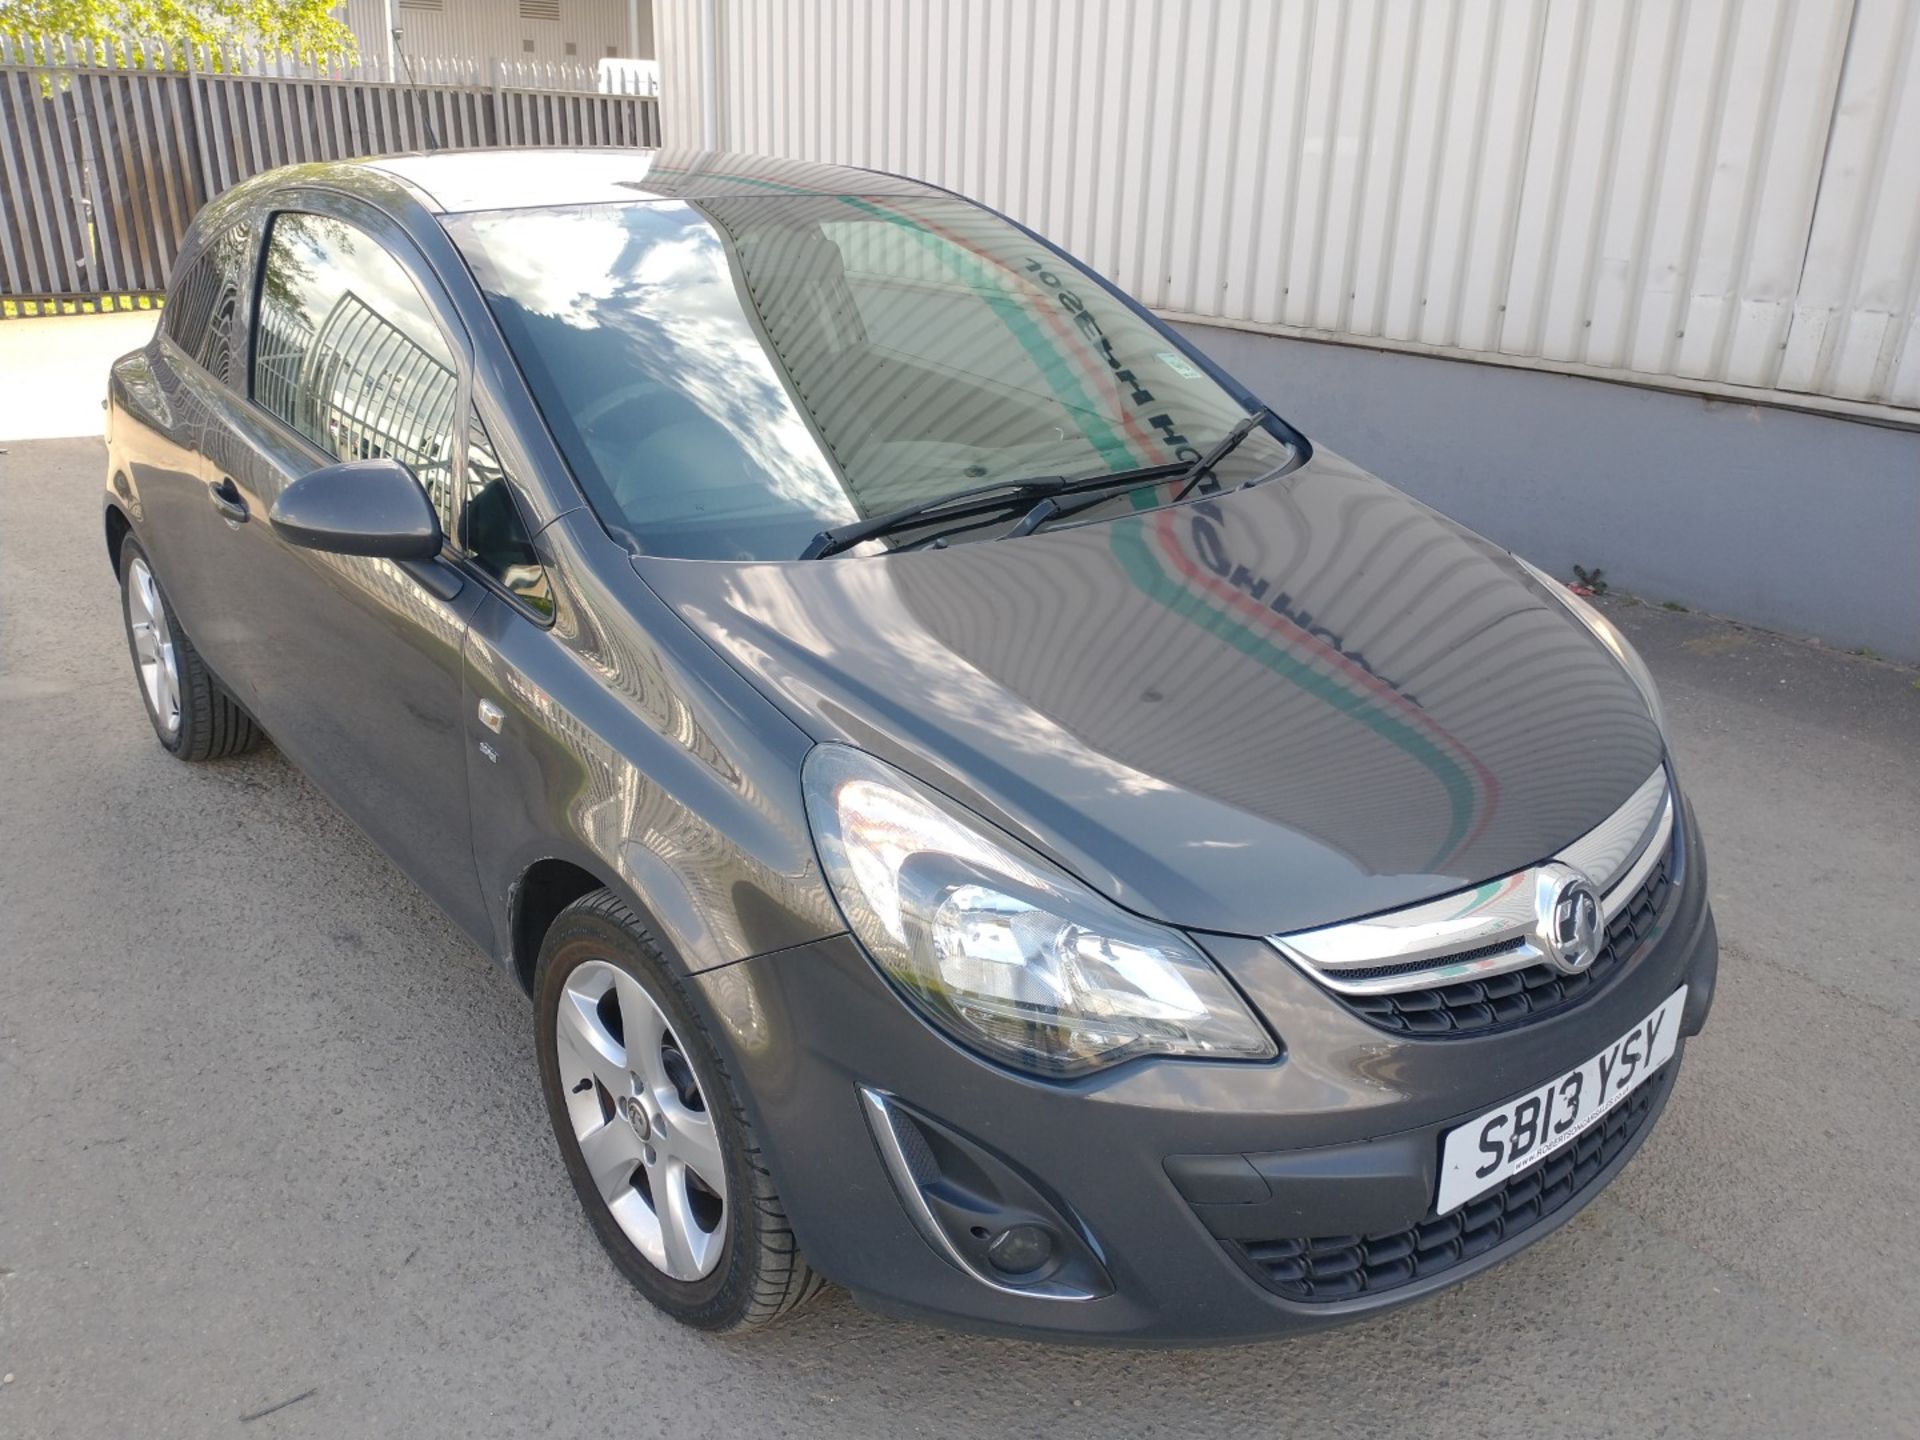 2013 Vauxhall Corsa SXI - CL505 - NO VAT ON THE HAMMER - Location: Corby, Northamptonshire